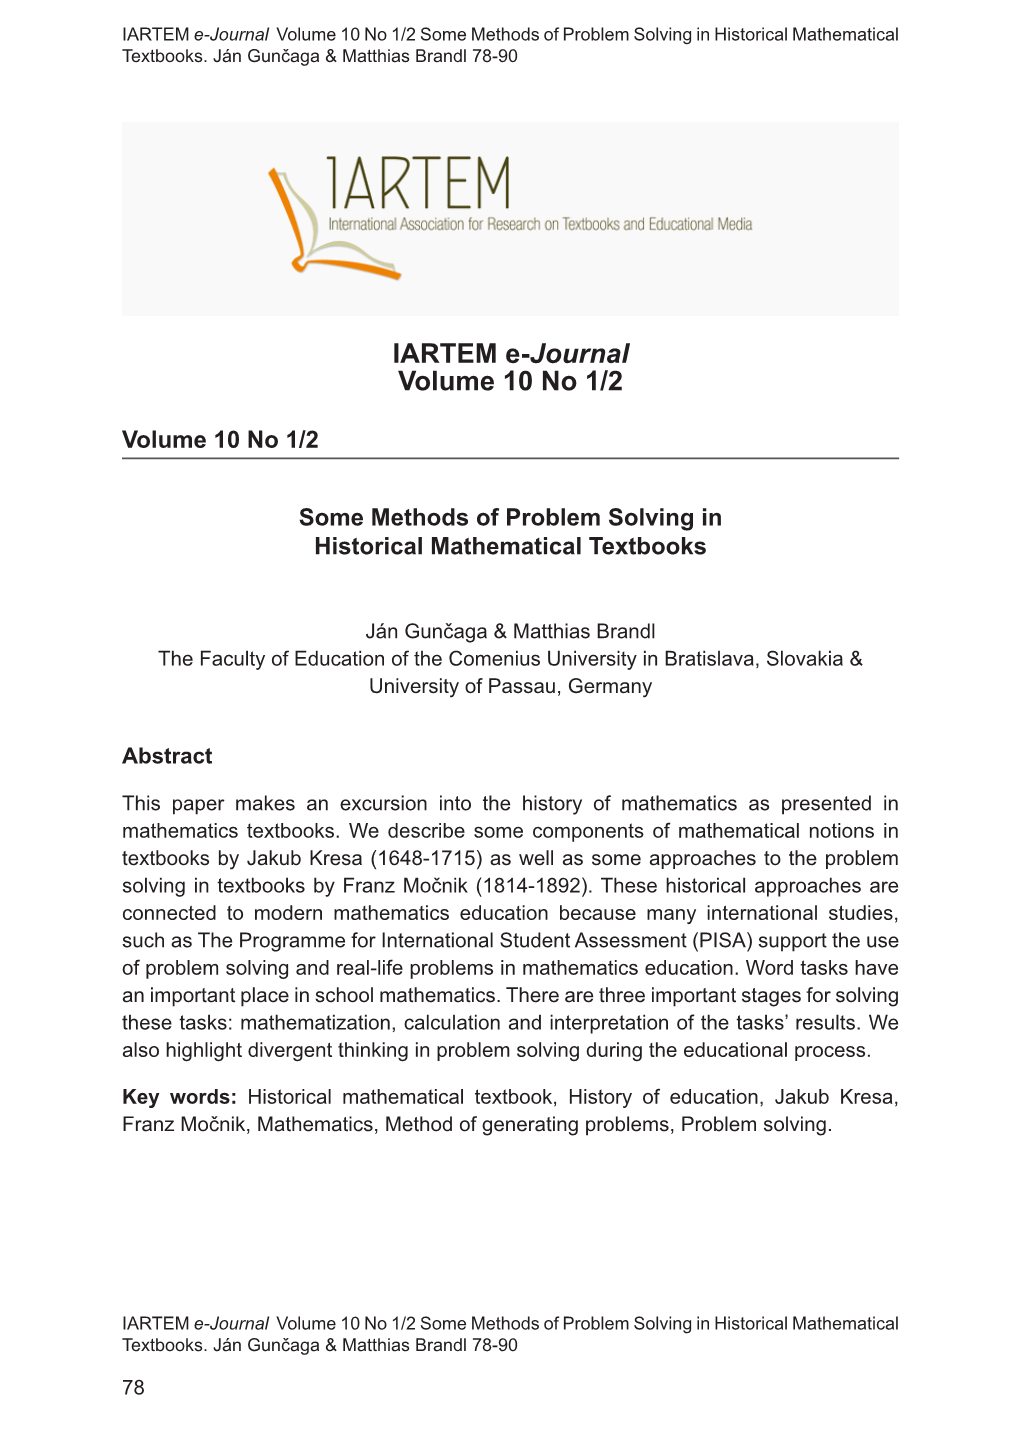 IARTEM E-Journal Volume 10 No 1/2 Some Methods of Problem Solving in Historical Mathematical Textbooks